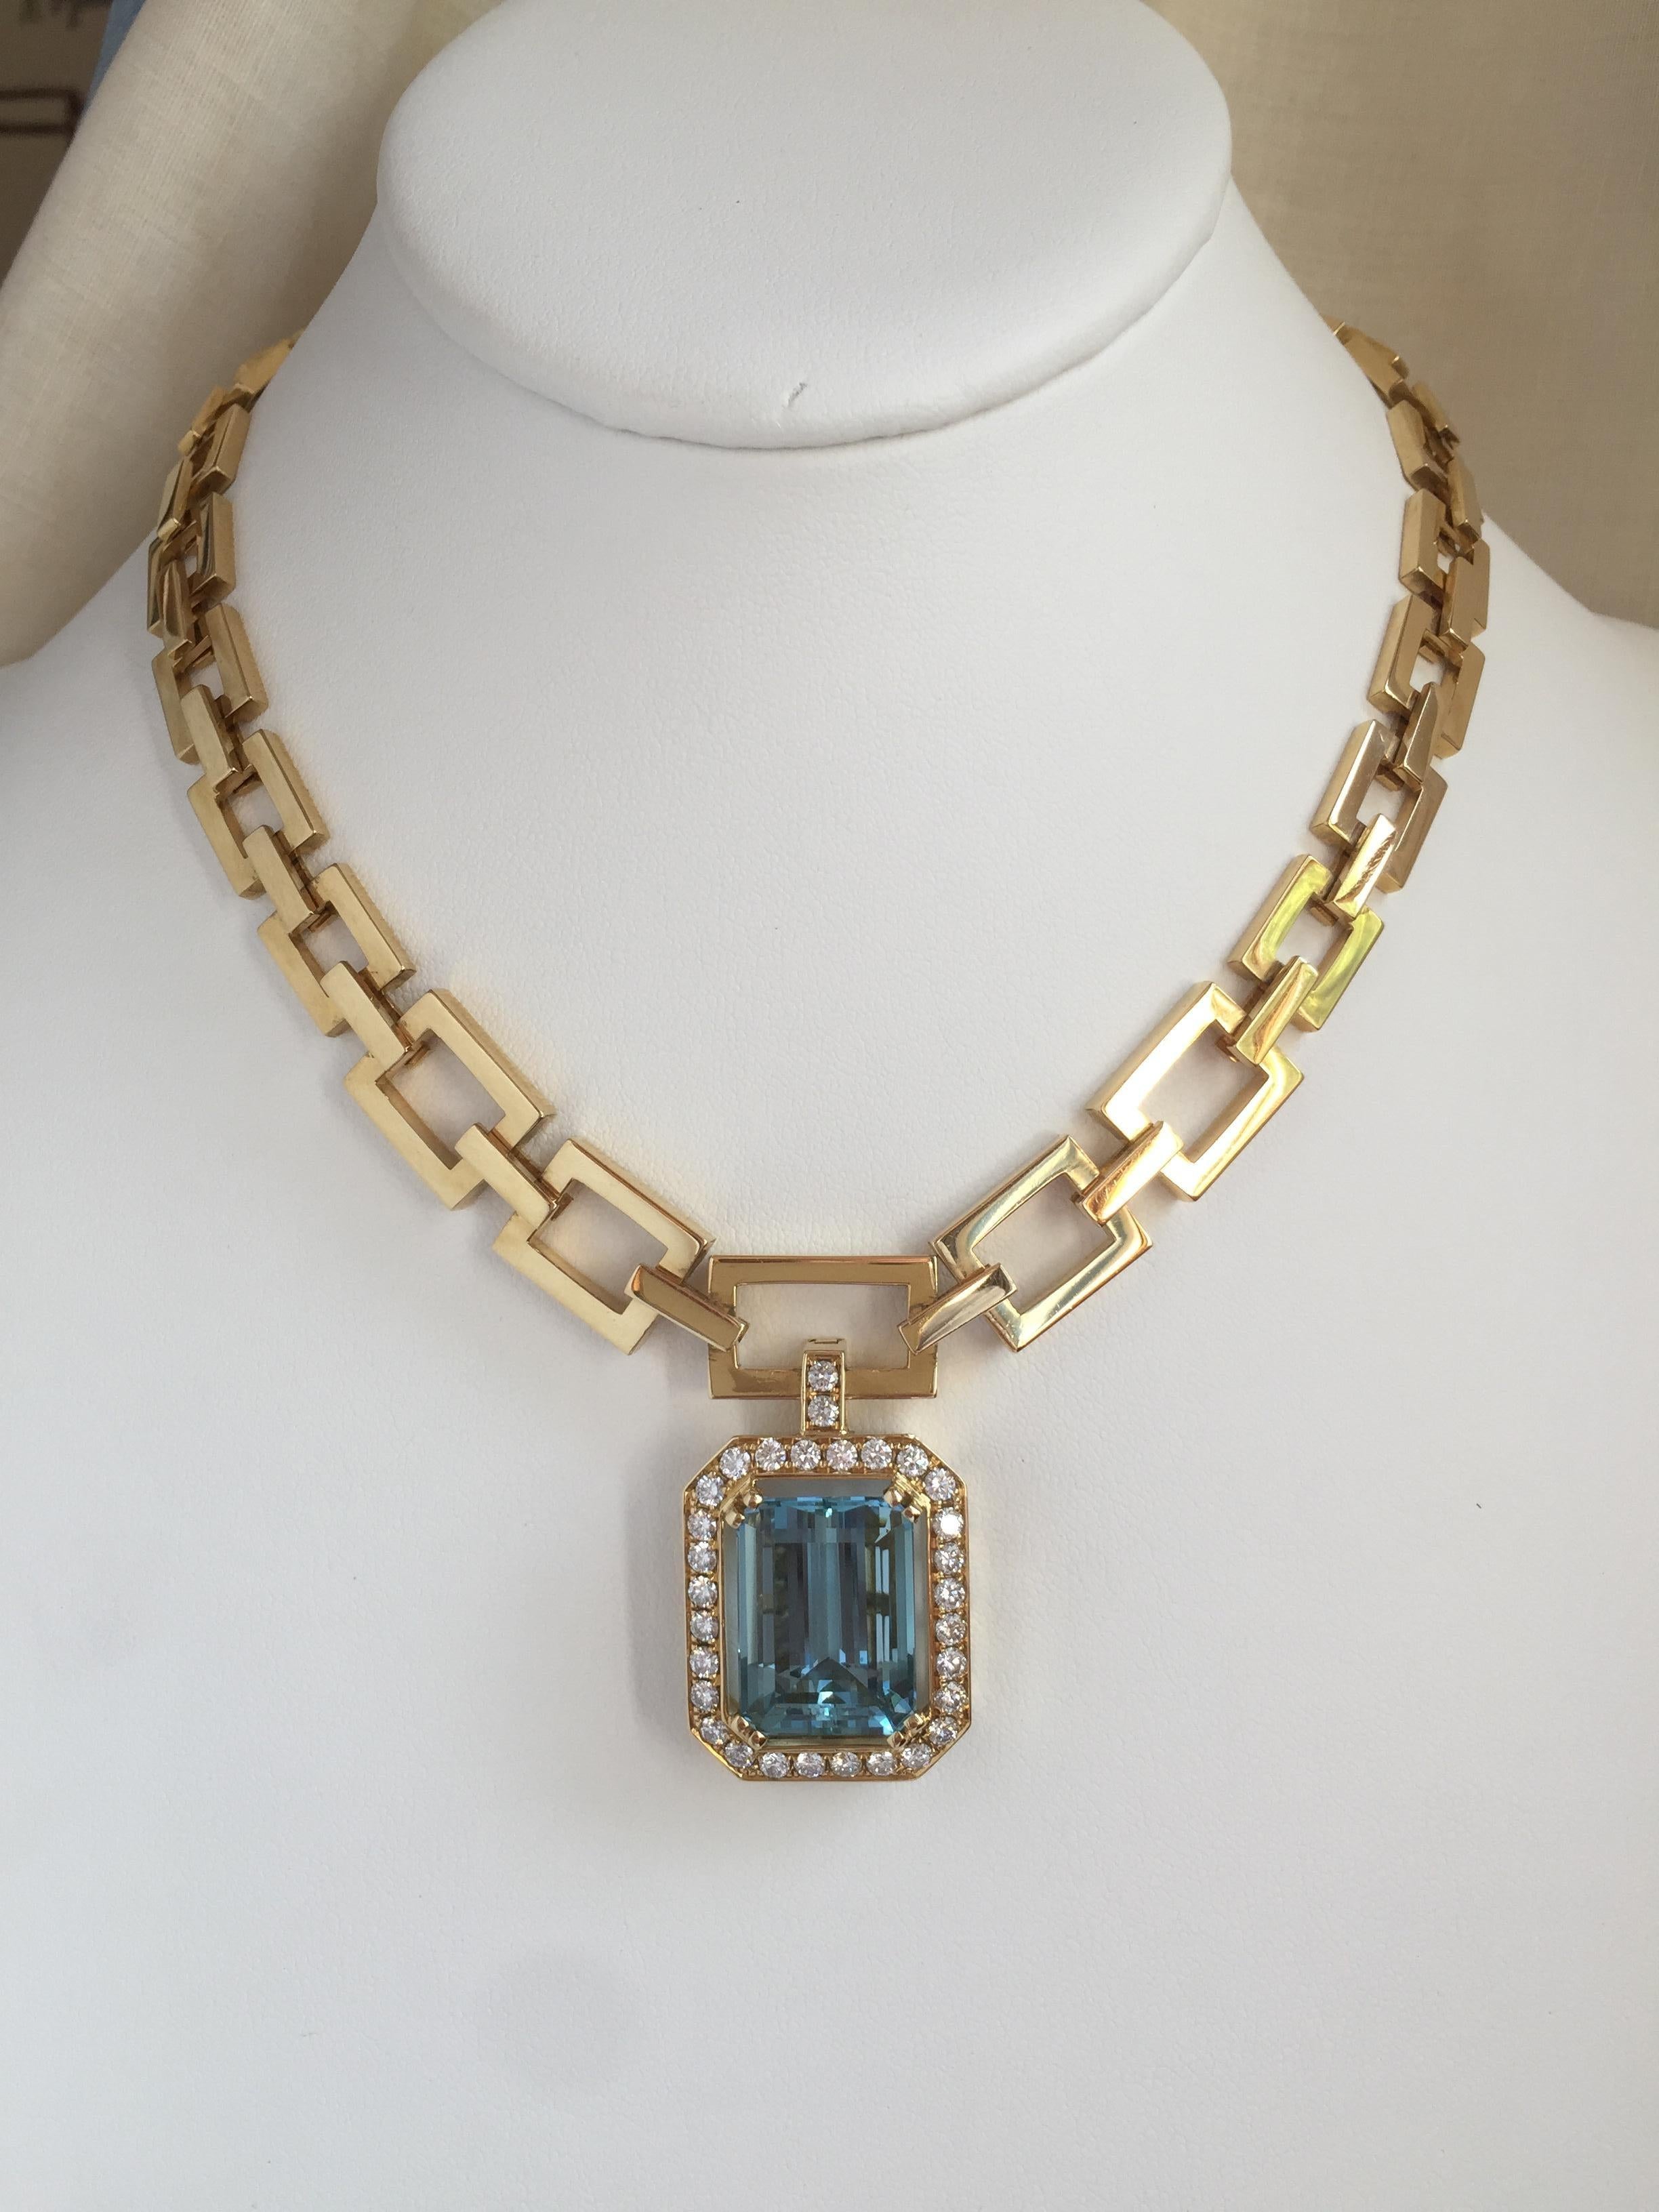 JdJ Couture Emerald Cut Aquamarine and Diamond Necklace in 14 Karat Yellow Gold For Sale 1